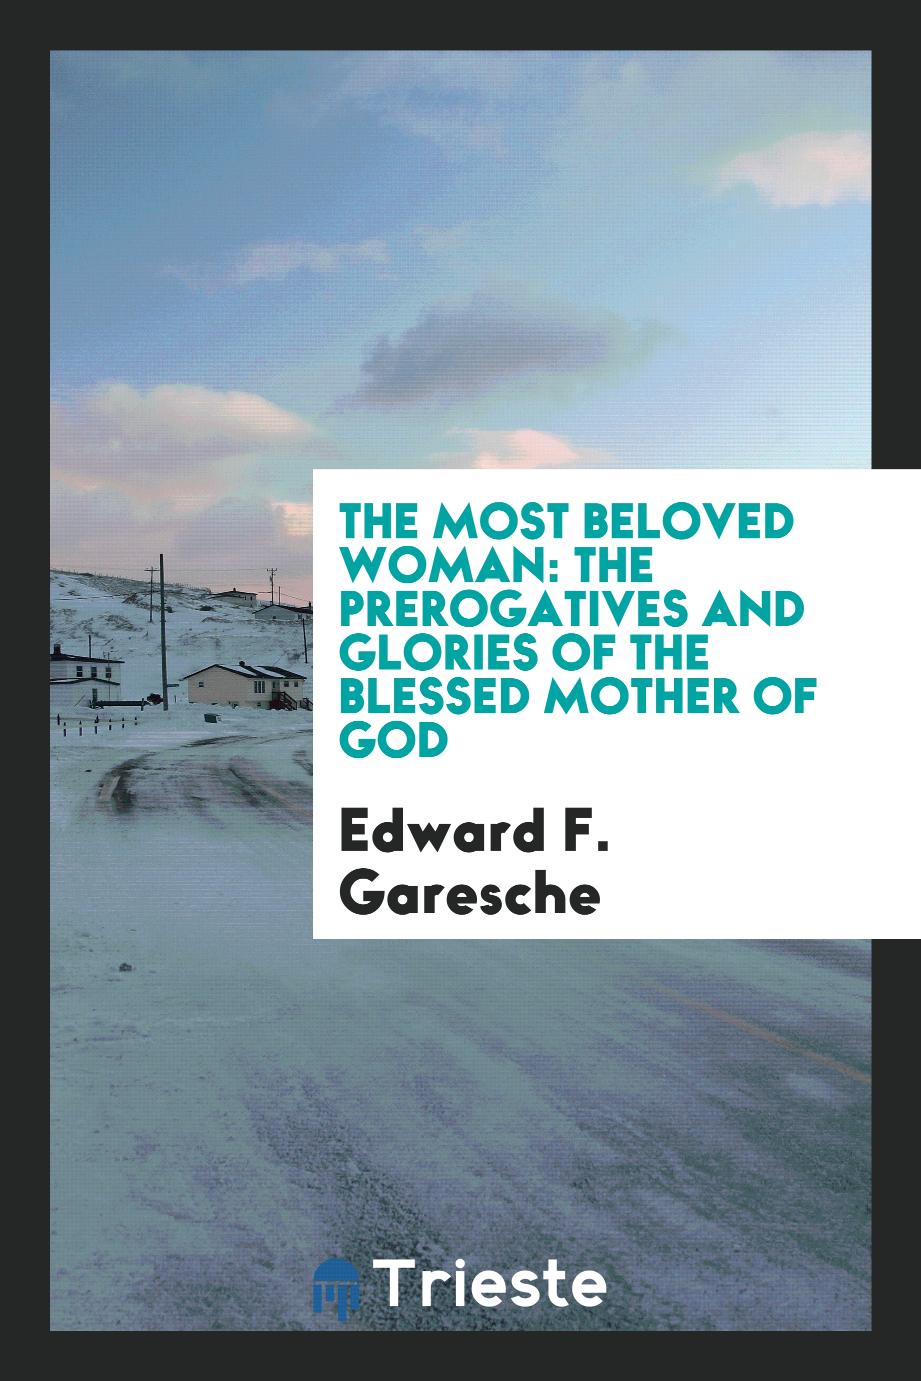 Edward F. Garesche - The most beloved woman: the prerogatives and glories of the Blessed Mother of God